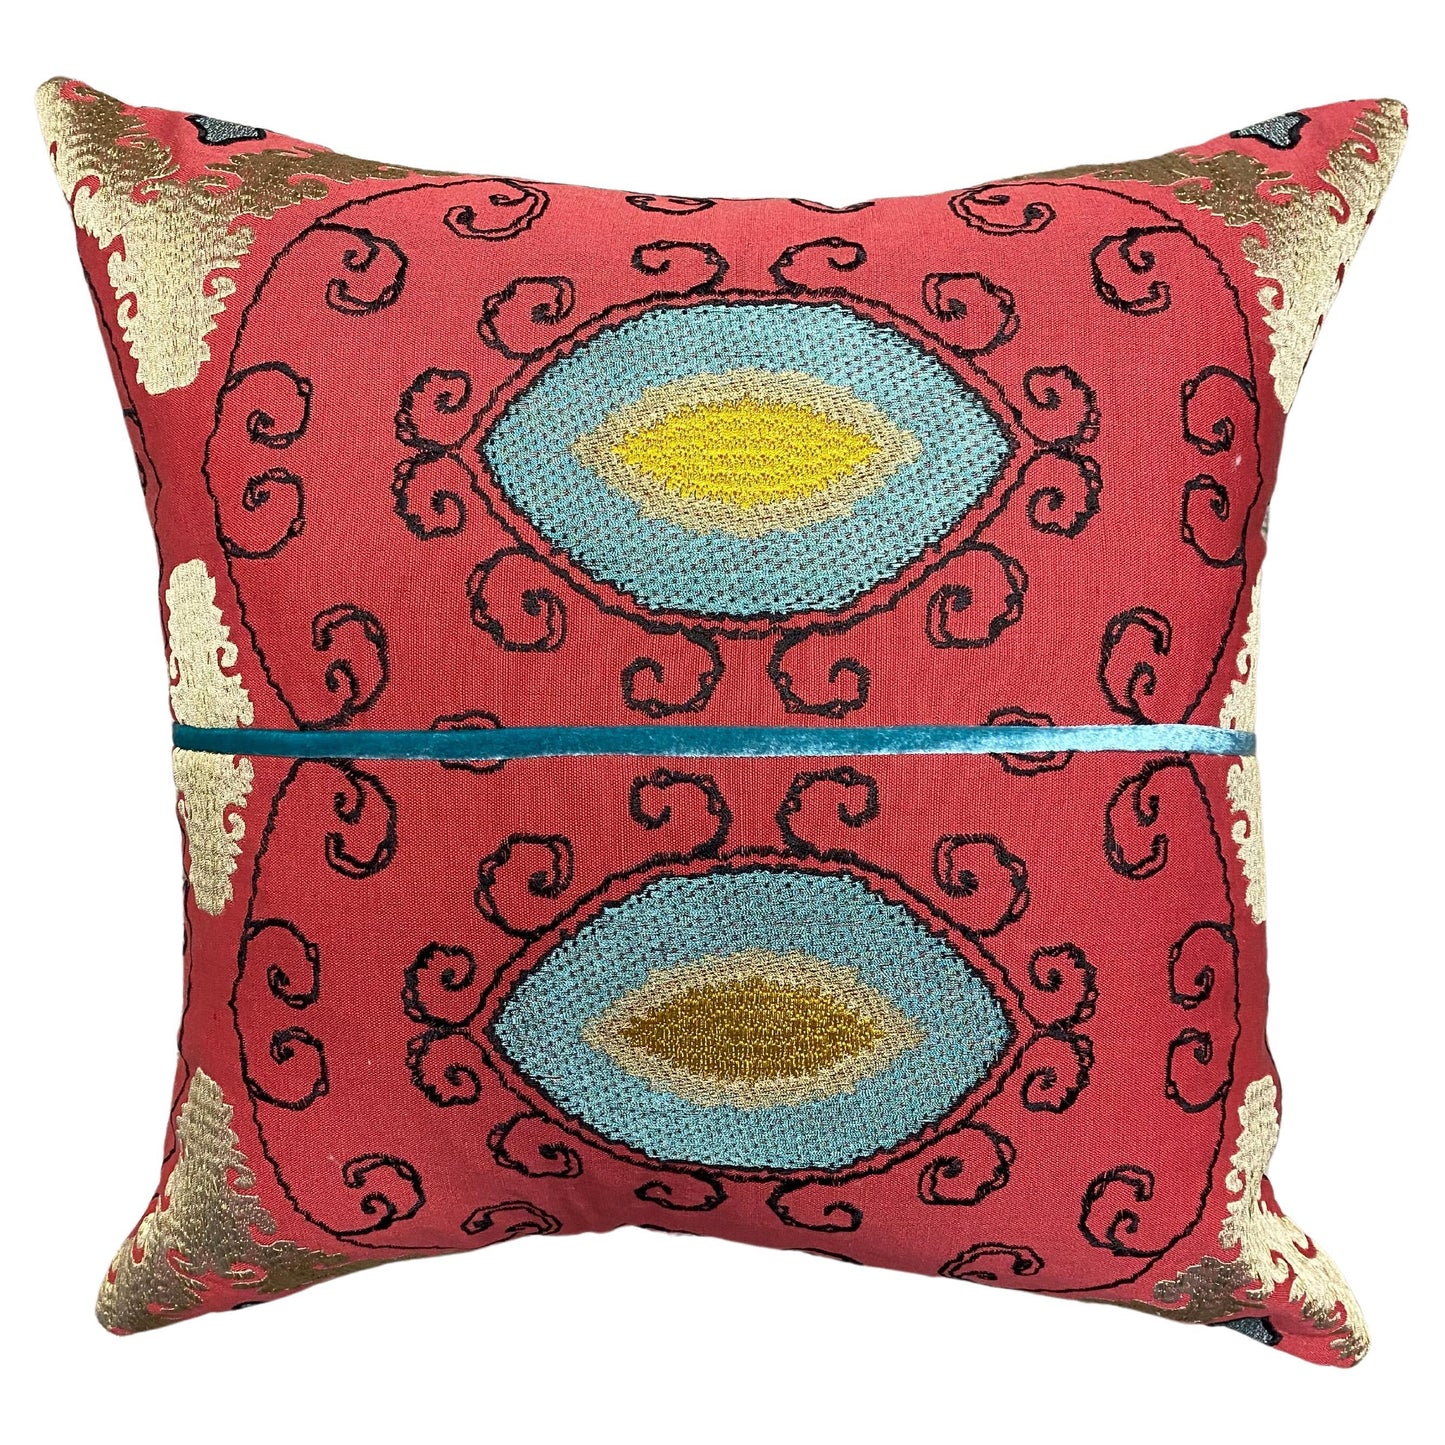 Red Tapesty Split Pillow with Teal Seeing Eye and Welt